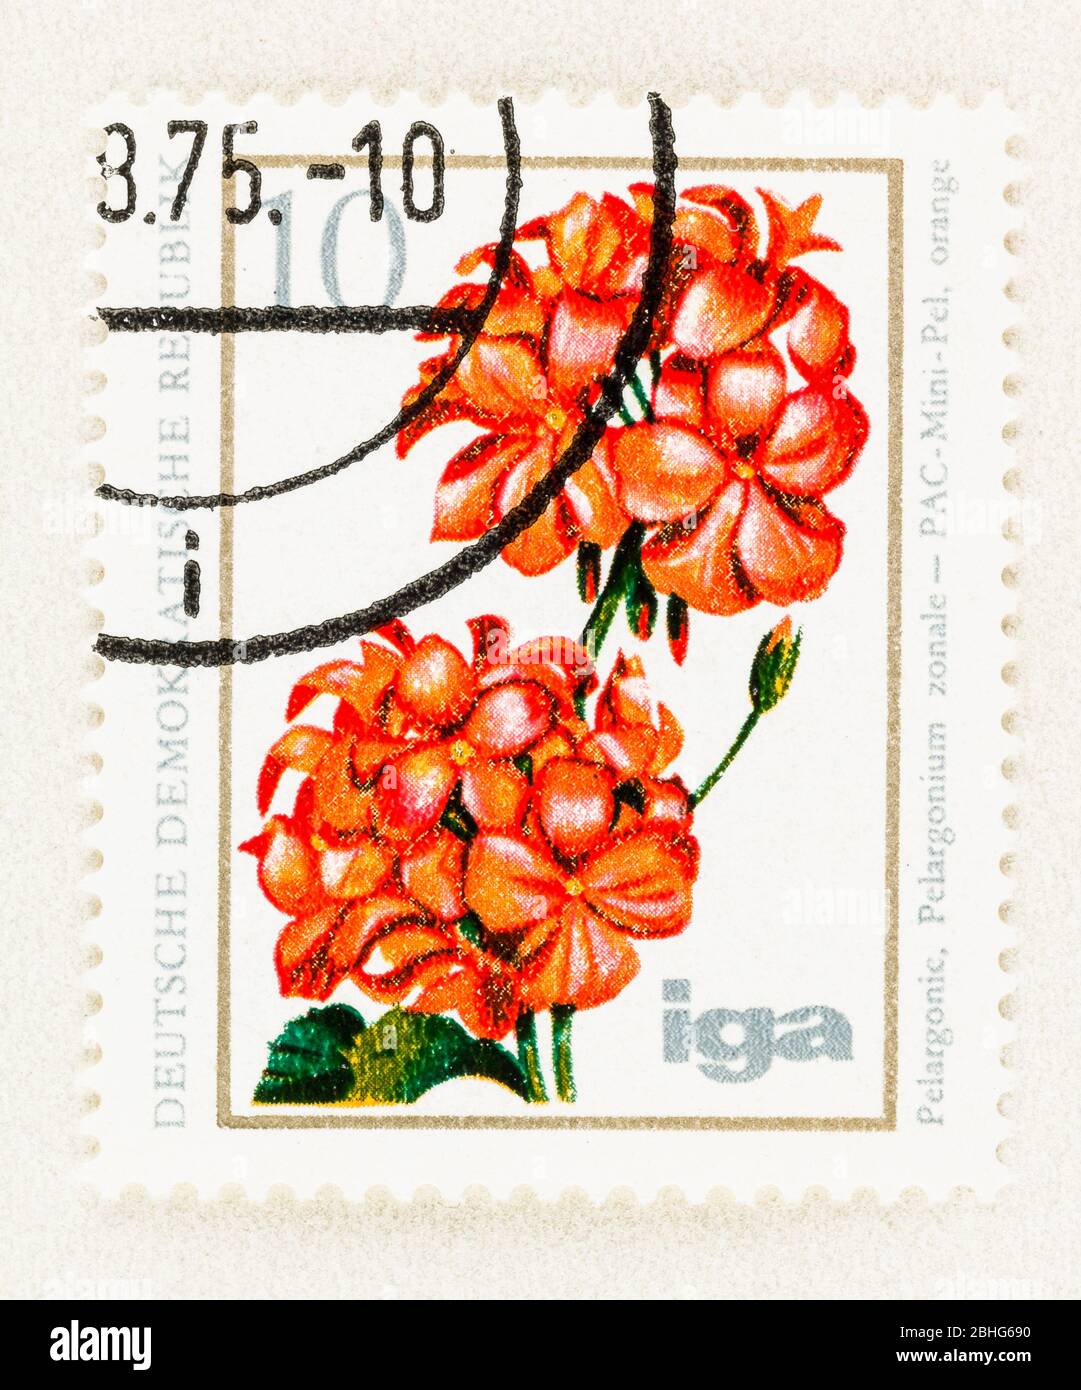 SEATTLE WASHINGTON - April 25, 2020: 1975 East Germany postage stamp featuring Geranium  in bloom. Scott # 1671 Stock Photo